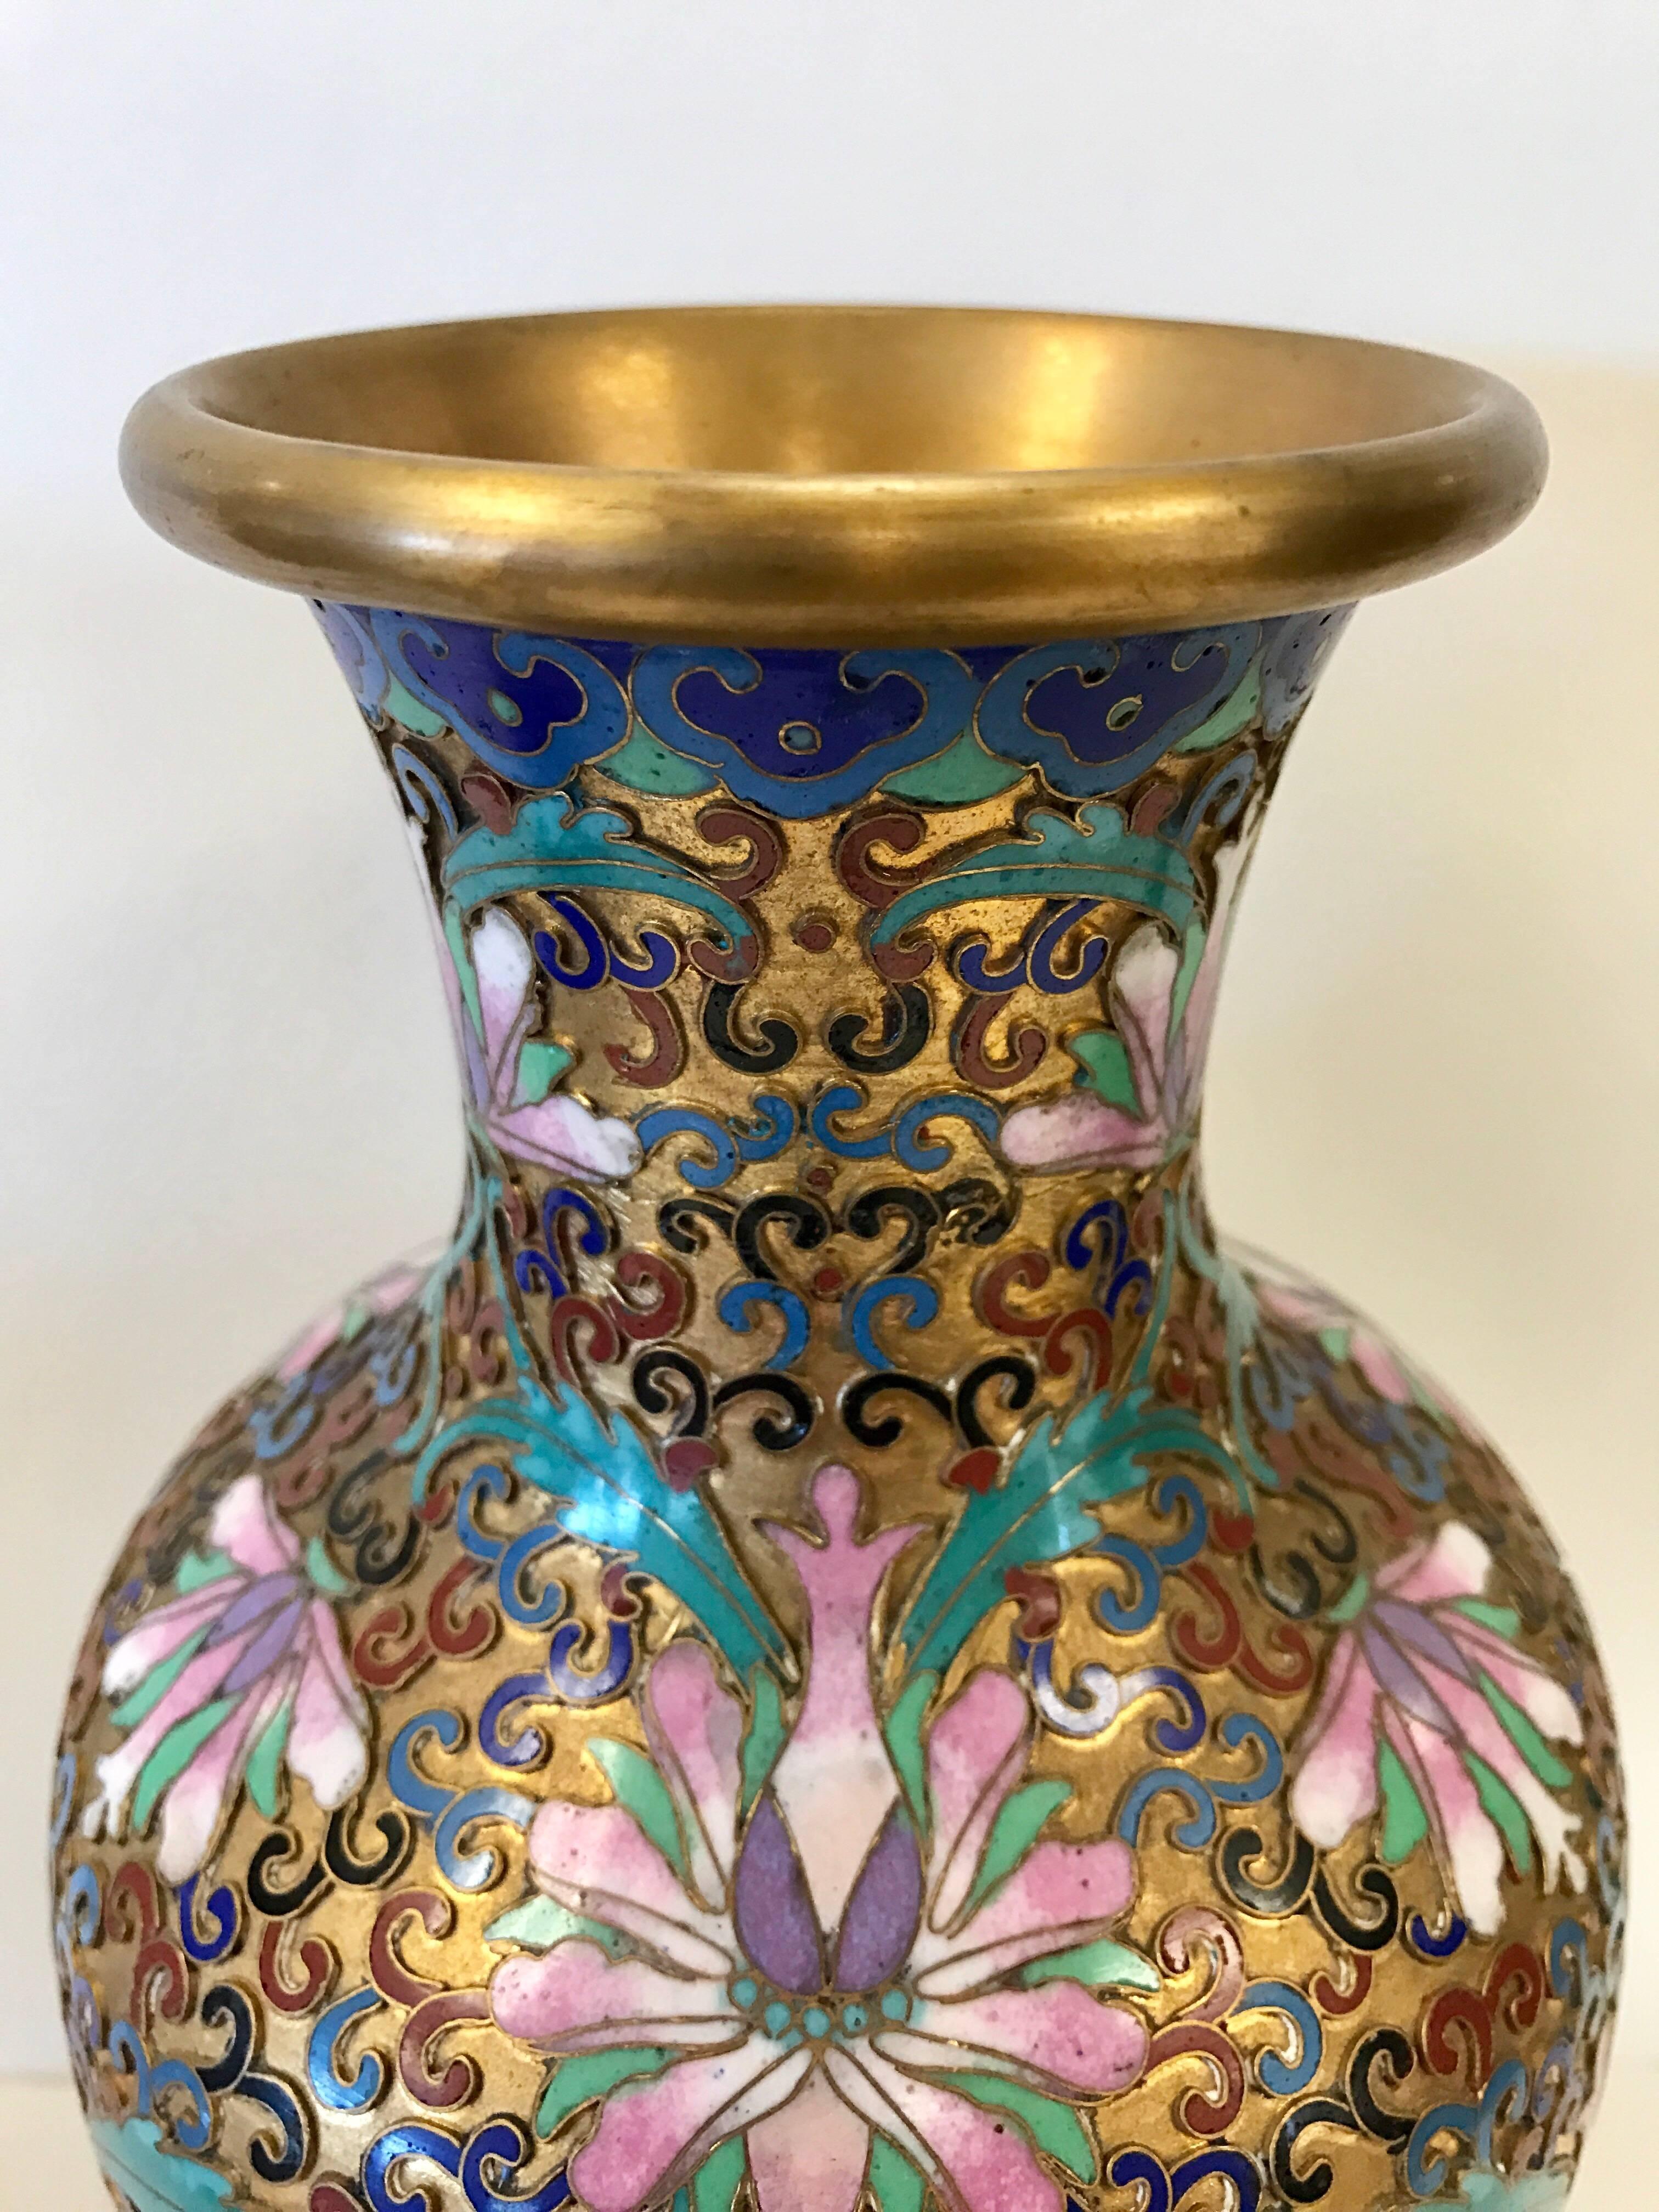 Matching pair of beautiful Chinese cloisonne urns decorated with a floral pattern all around.